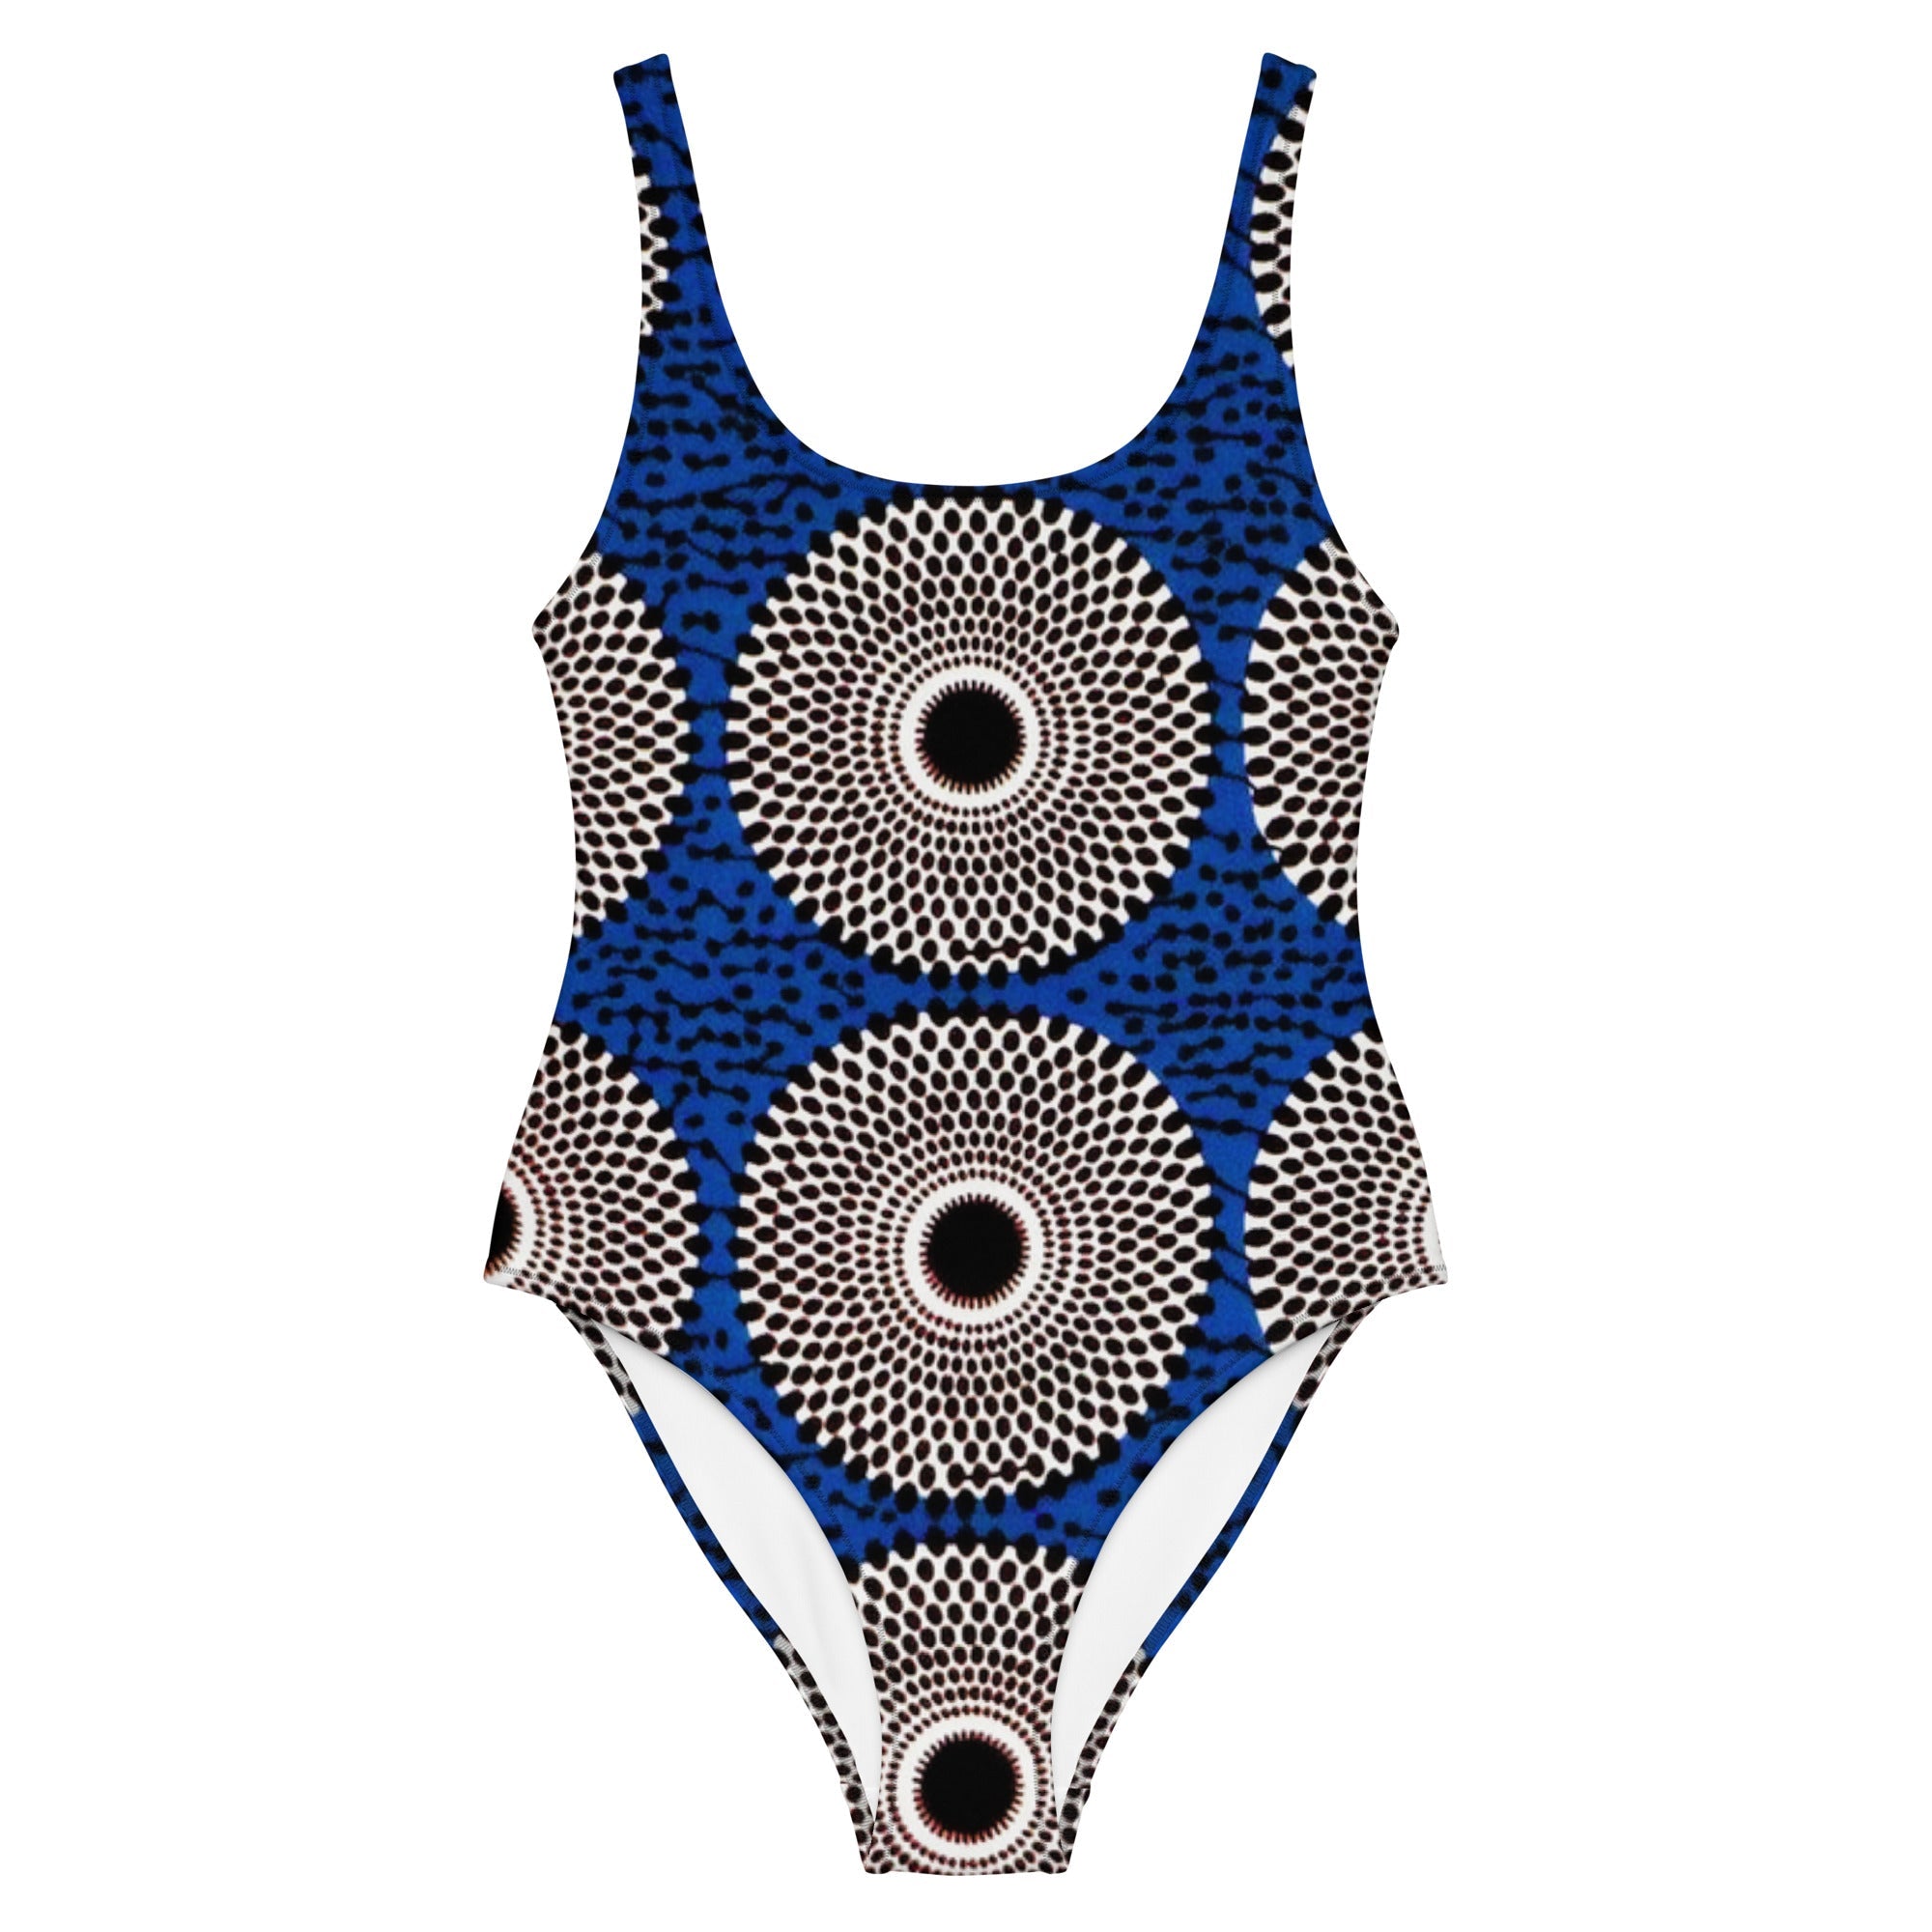 Bynelo African Print One Piece Swimsuit